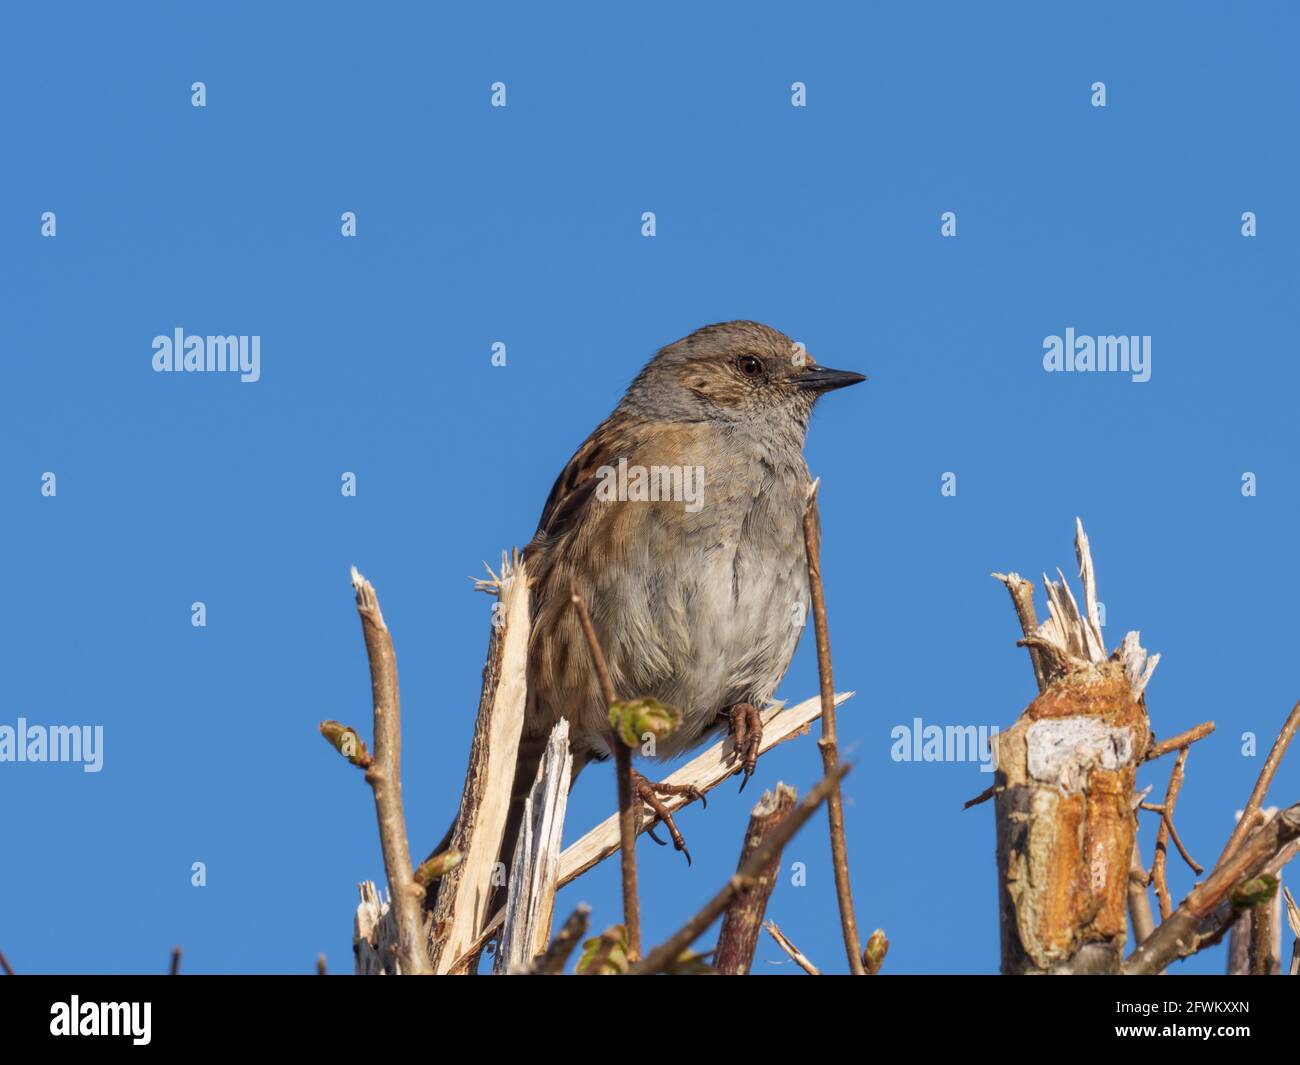 A Dunnock (Prunella modularis) also known as Hedge Accentor, Hedge Sparrow, or Hedge Warbler, sitting on top of a recently cut hedge. Stock Photo